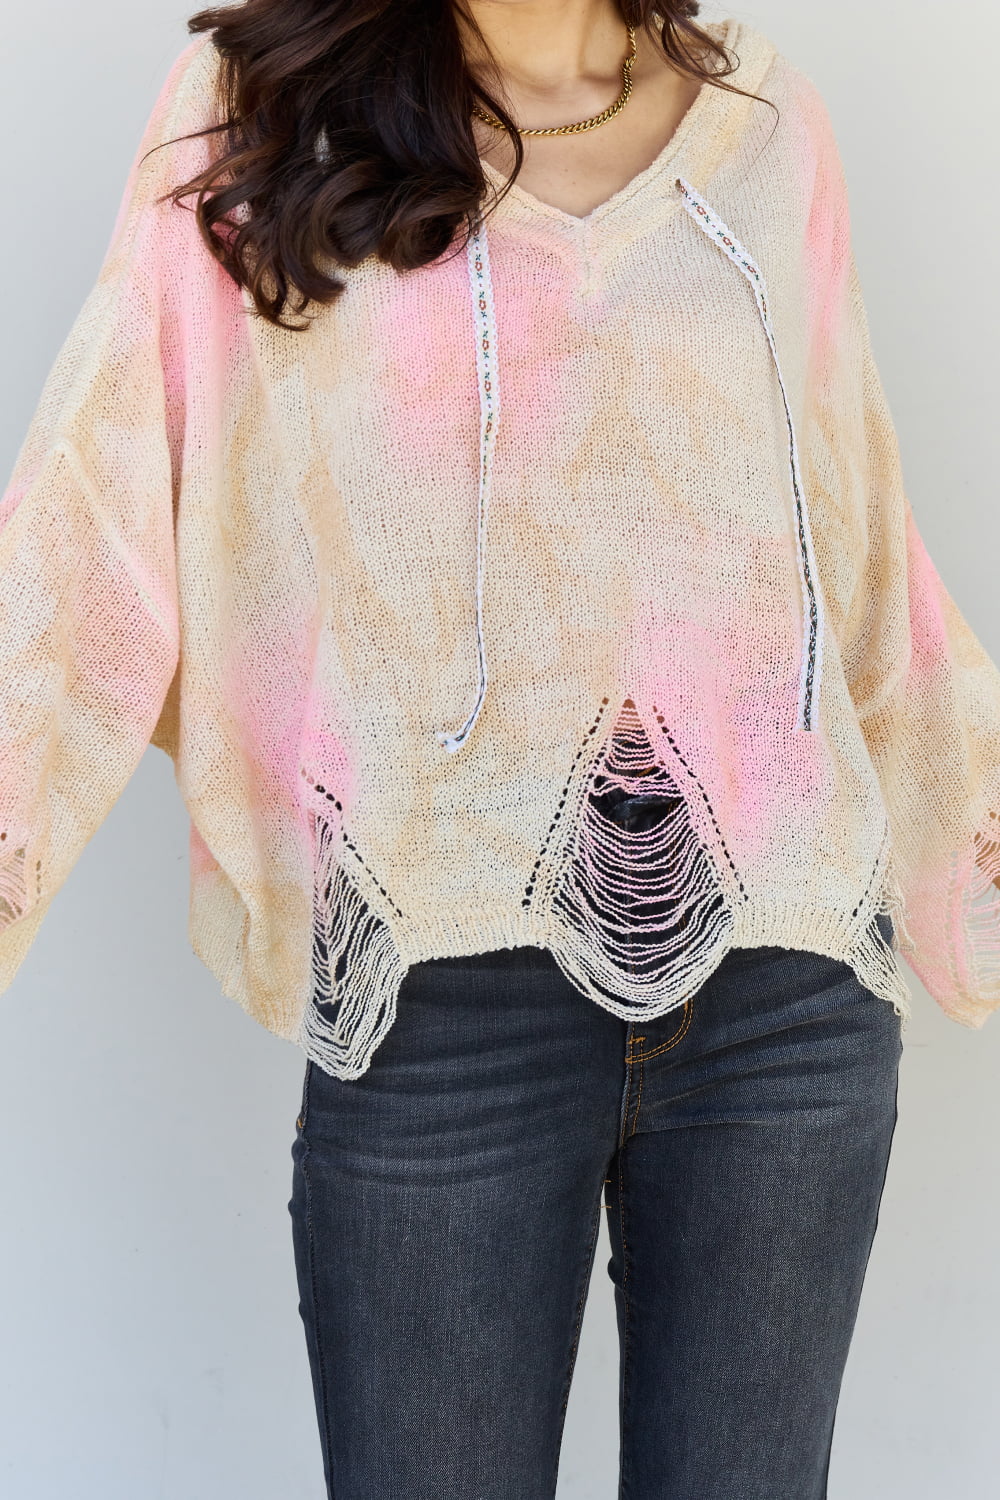 POL Mix It Up Tie Dye Hooded Distressed Sweater in Ivory/Pink